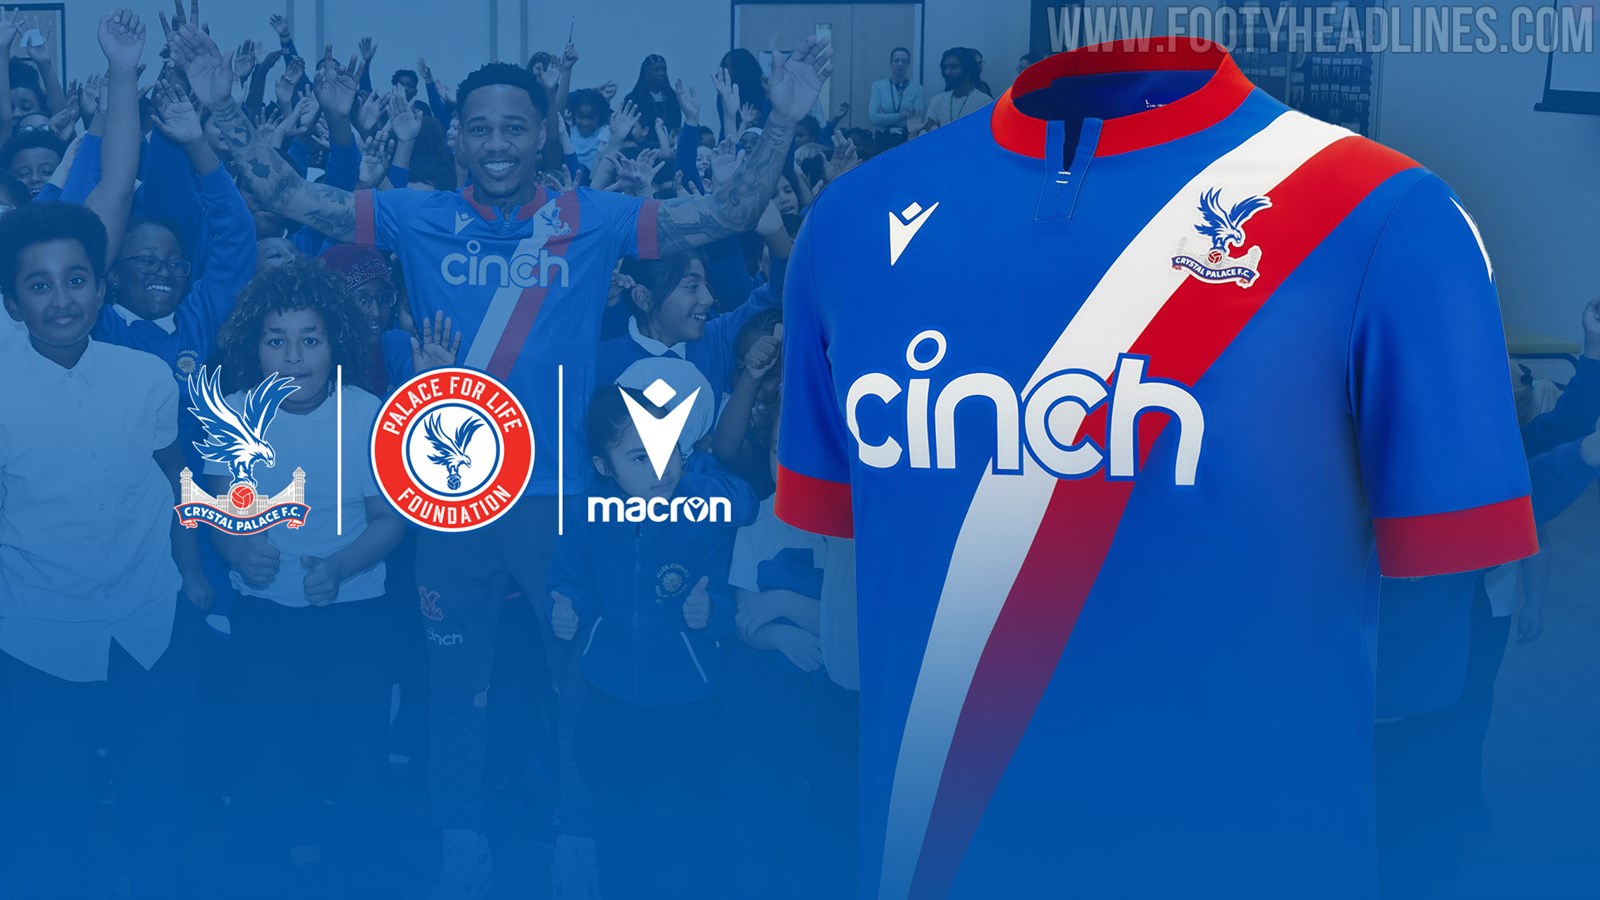 Crystal Palace 23-24 Fourth Kit Released - Footy Headlines